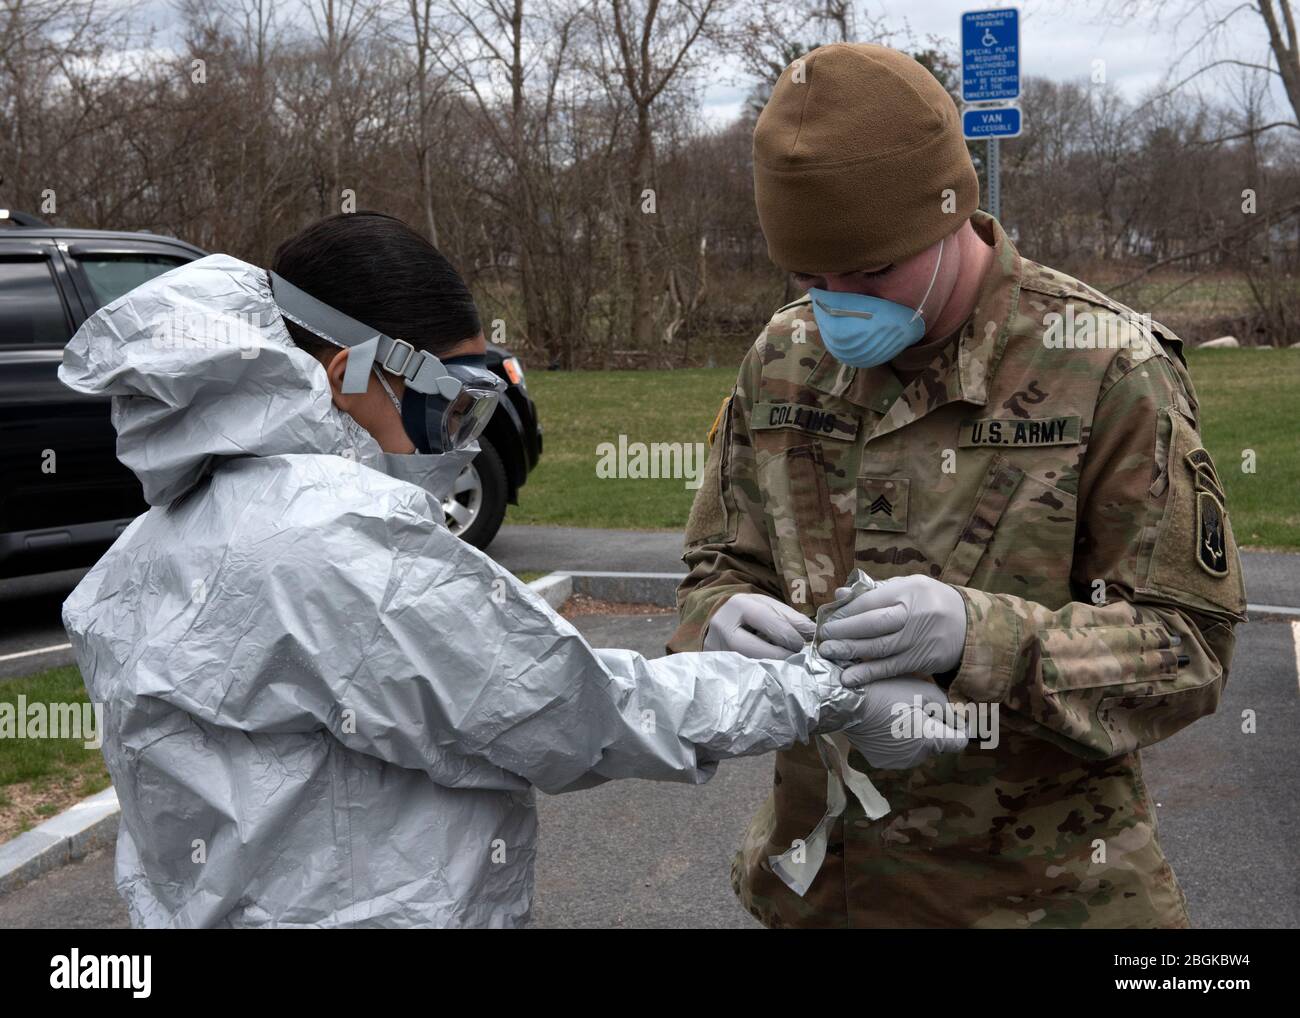 Soldiers and Airmen from the Massachusetts National Guard go through a detailed decontamination process and remove their personal protective equipment (PPE) after completing COVID-19 testing on residents at Alliance at West Acres nursing home, Brockton, Mass., April 10, 2020. The decontamination process includes safely removing the PPE and being sprayed with chemicals to remove any possible contaminants that they may have come in contact with. Twelve medical teams are activated throughout the state and are conducting COVID-19 testing at medical facilities and nursing homes with high-risk popul Stock Photo